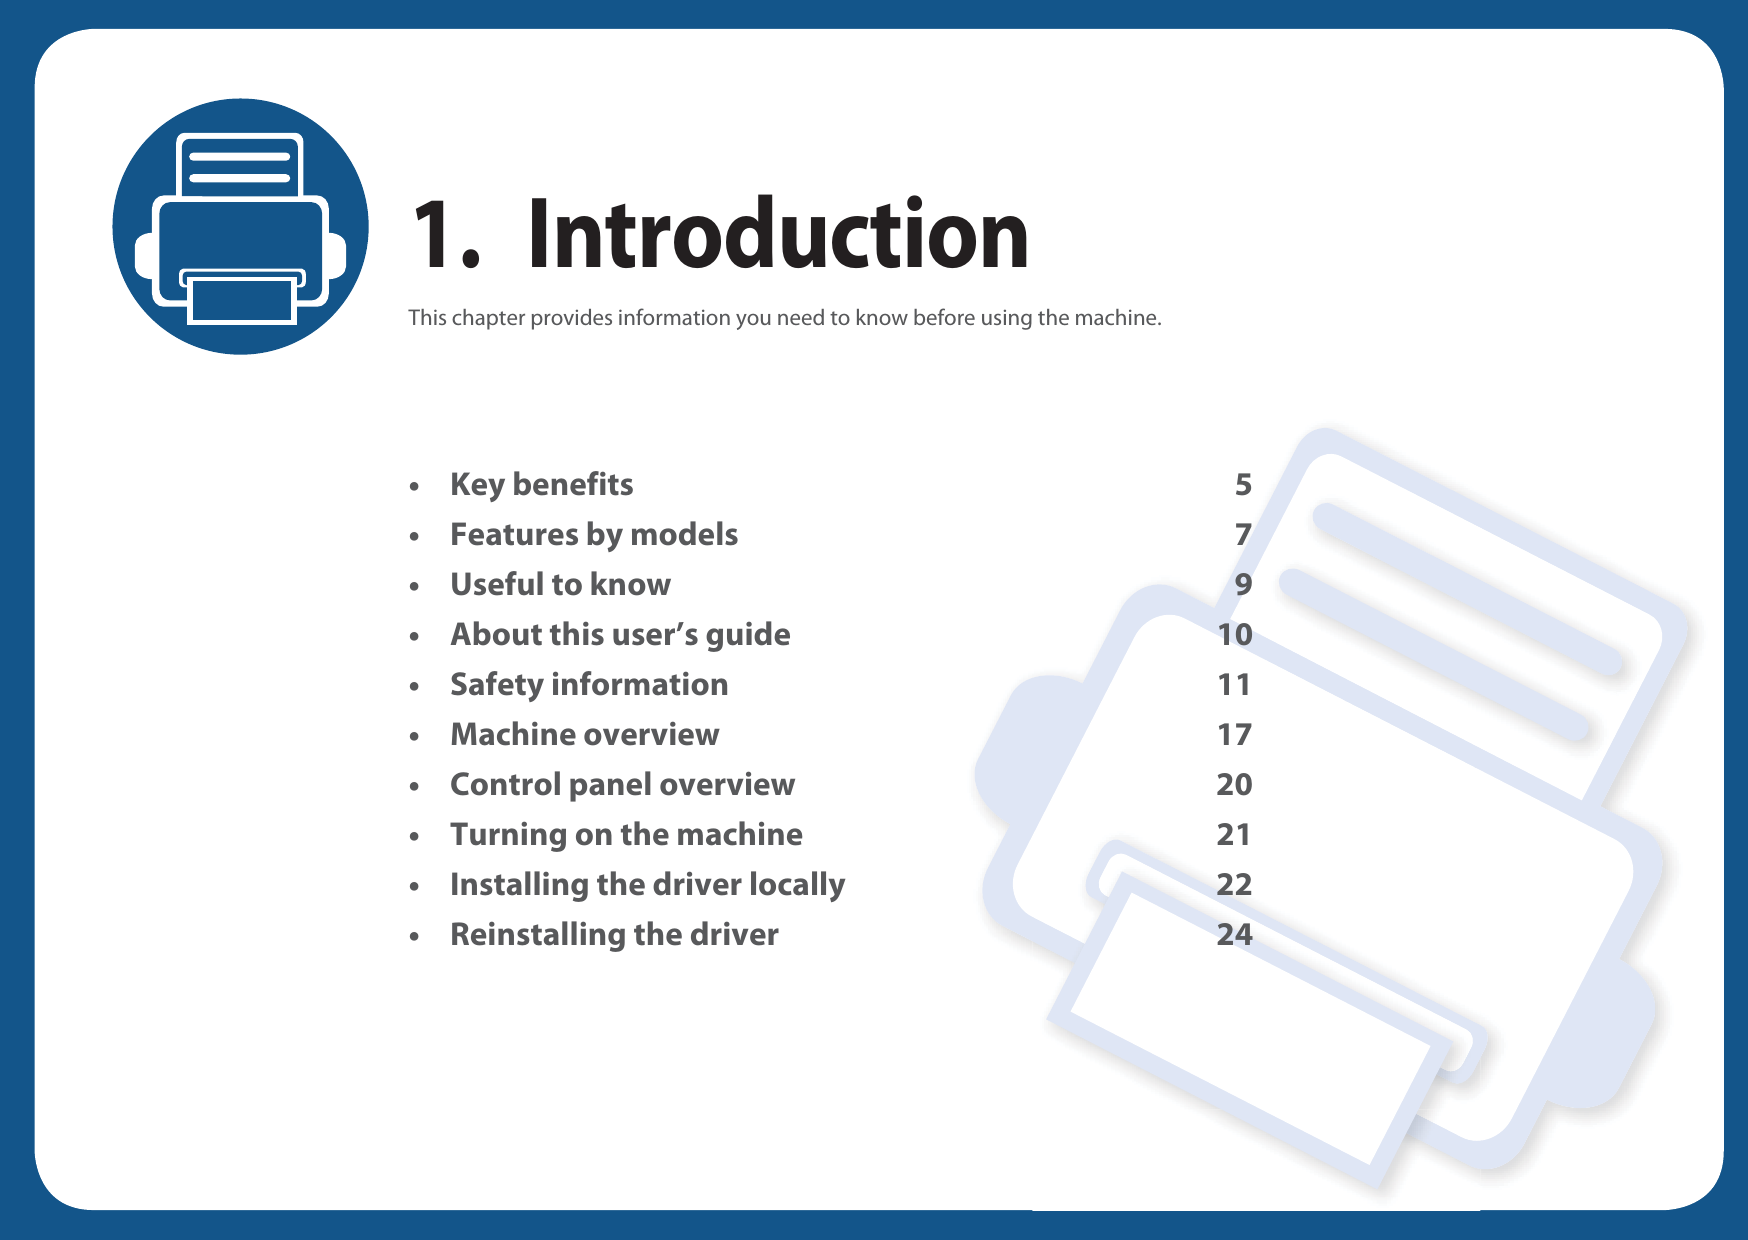 1. IntroductionThis chapter provides information you need to know before using the machine.•Key benefits 5• Features by models 7• Useful to know 9• About this user’s guide 10• Safety information 11• Machine overview 17• Control panel overview 20• Turning on the machine 21• Installing the driver locally 22• Reinstalling the driver 24